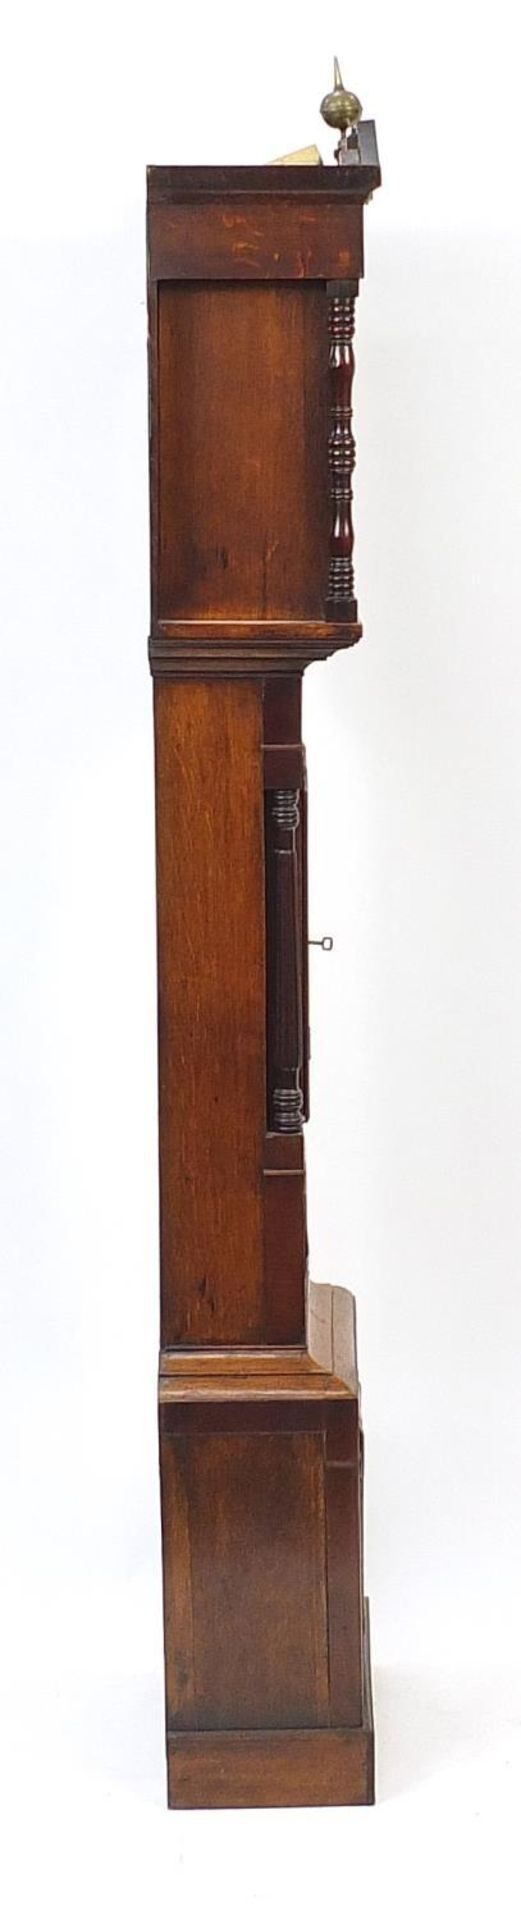 Early 19th century mahogany and oak longcase clock with brass face and subsidiary dial, the circular - Image 7 of 9